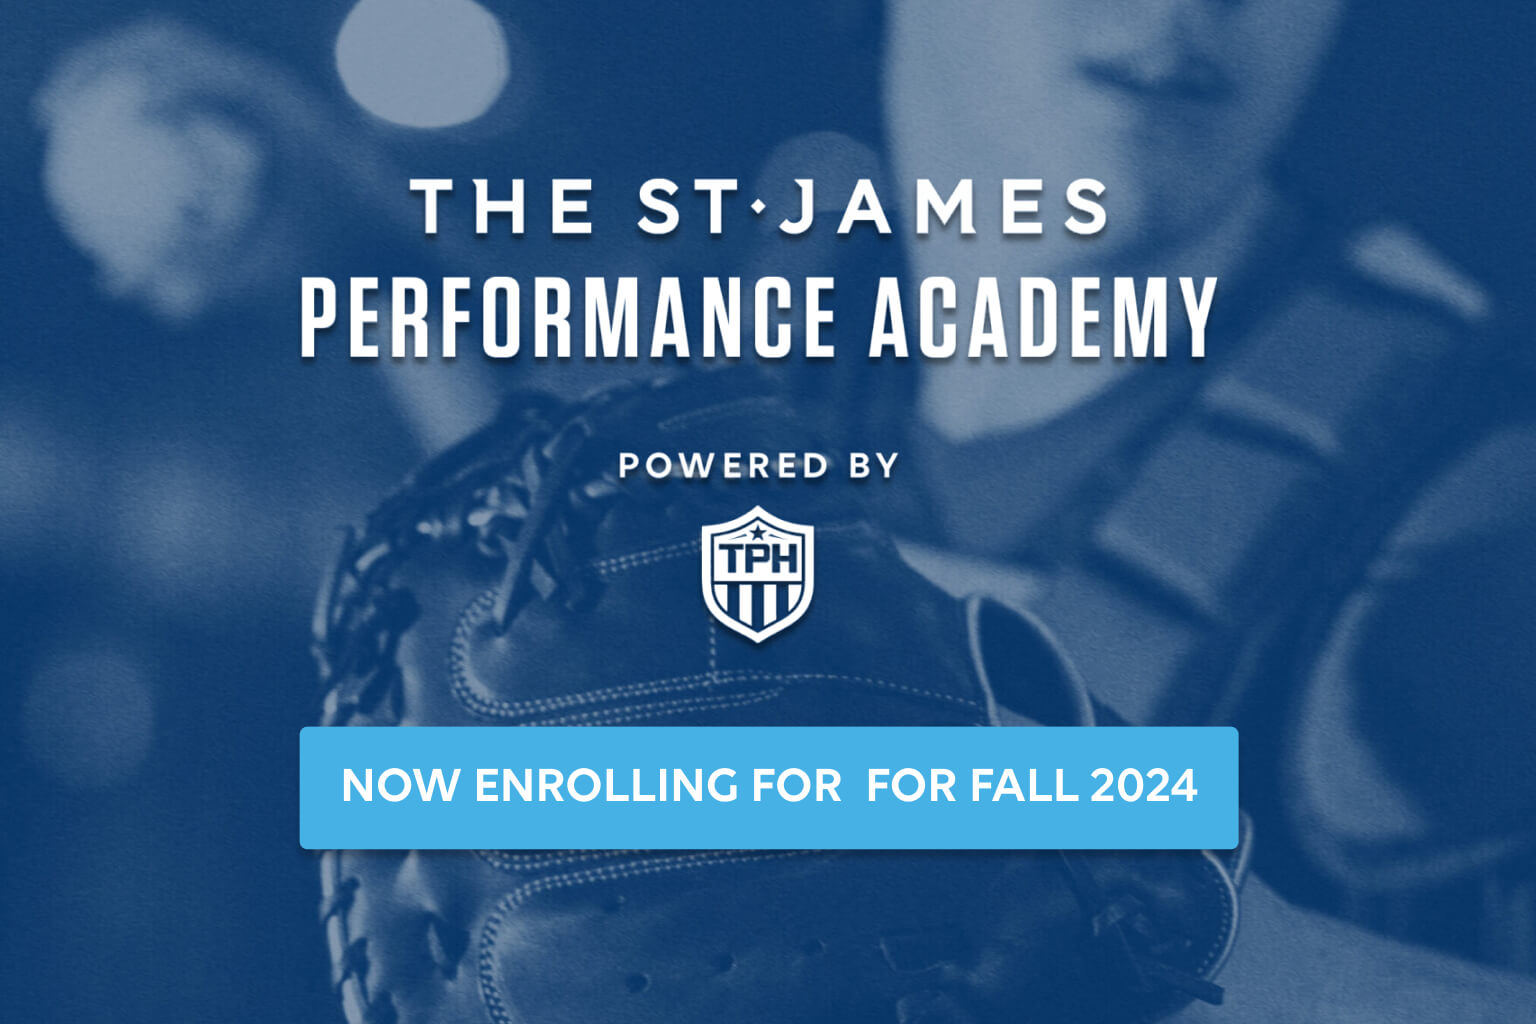 The St. James Performance Academy - Now enrolling for Fall 2024